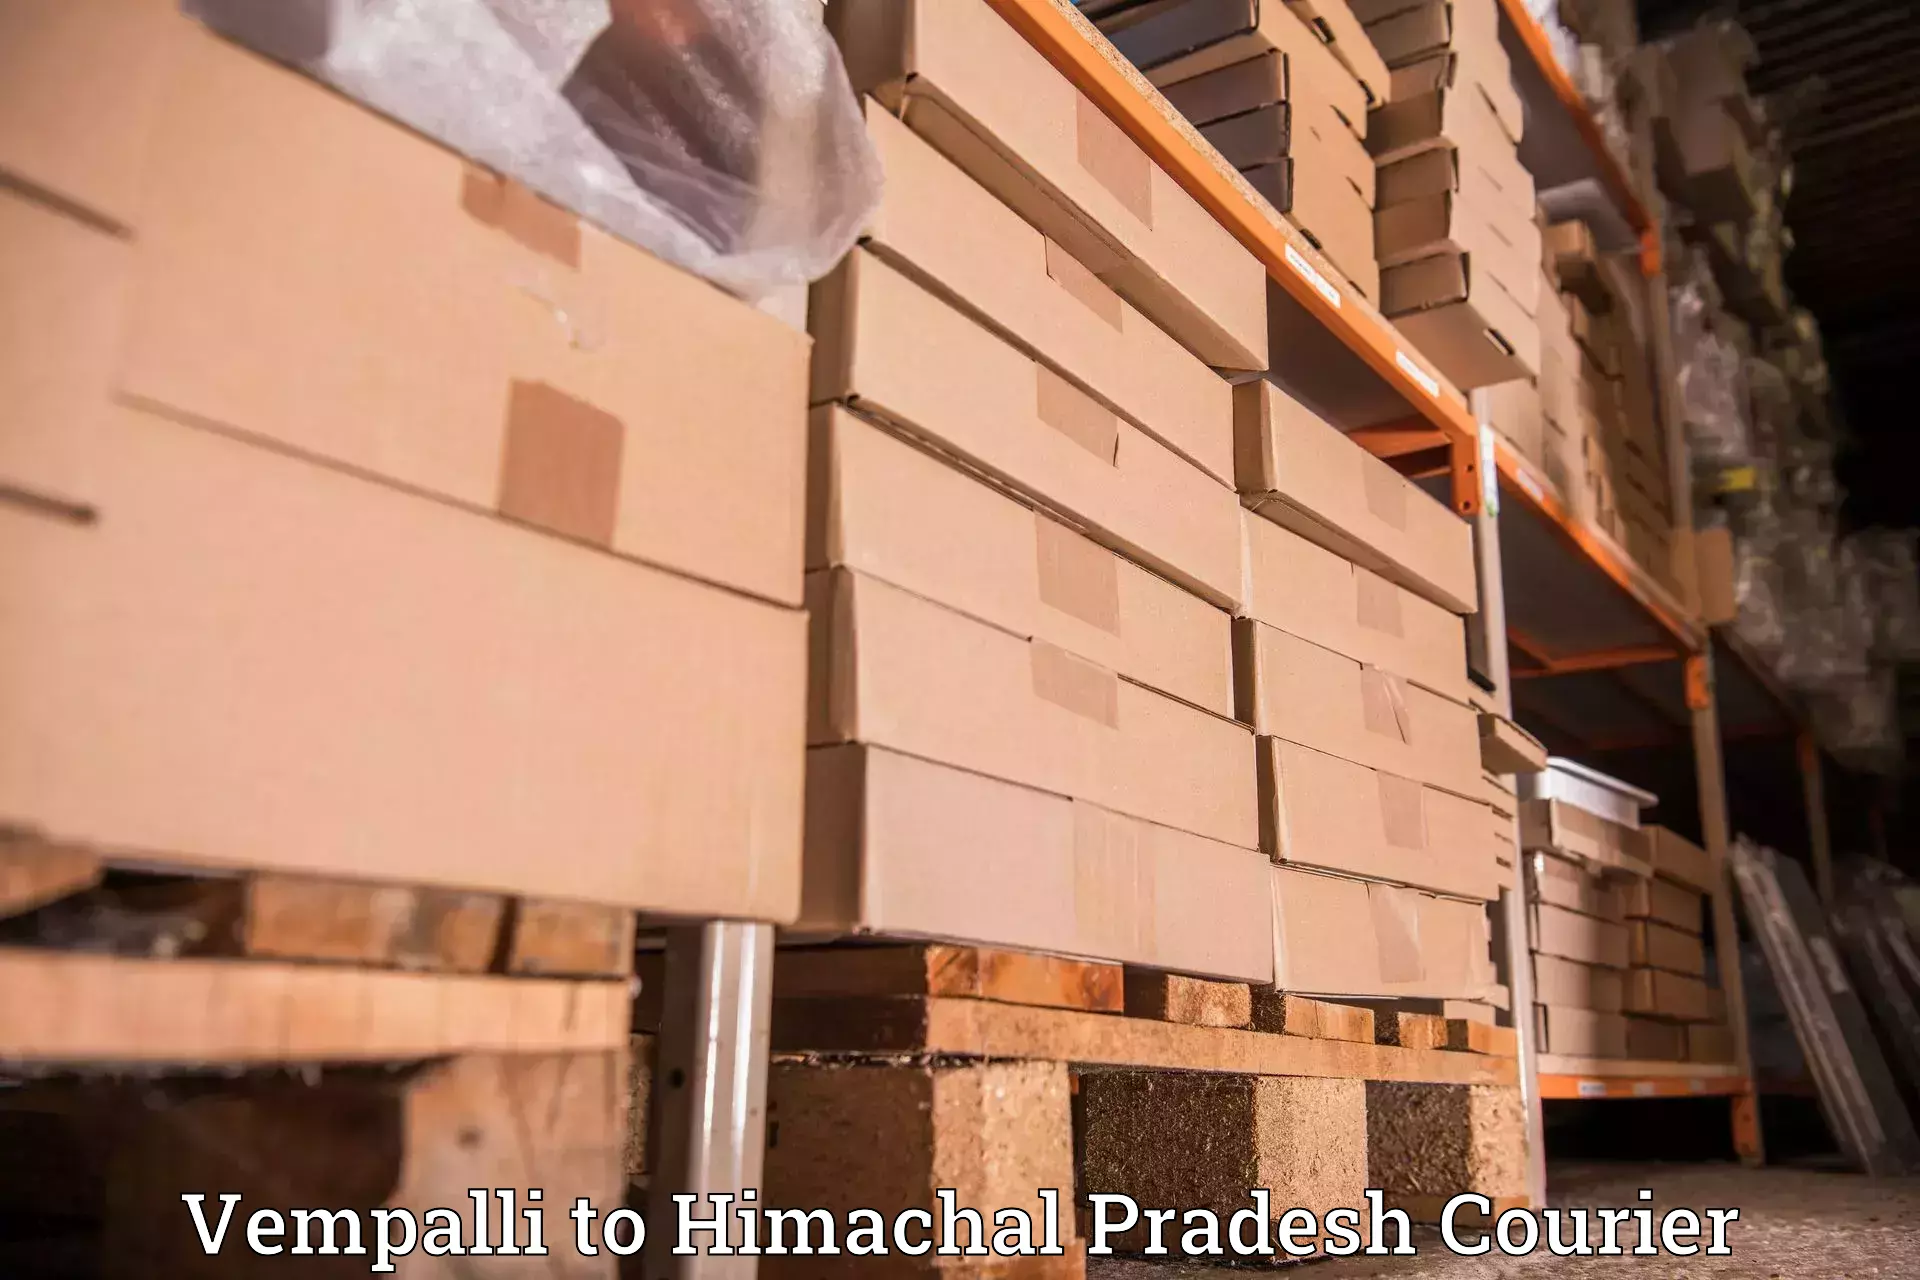 Courier service comparison in Vempalli to Chachyot